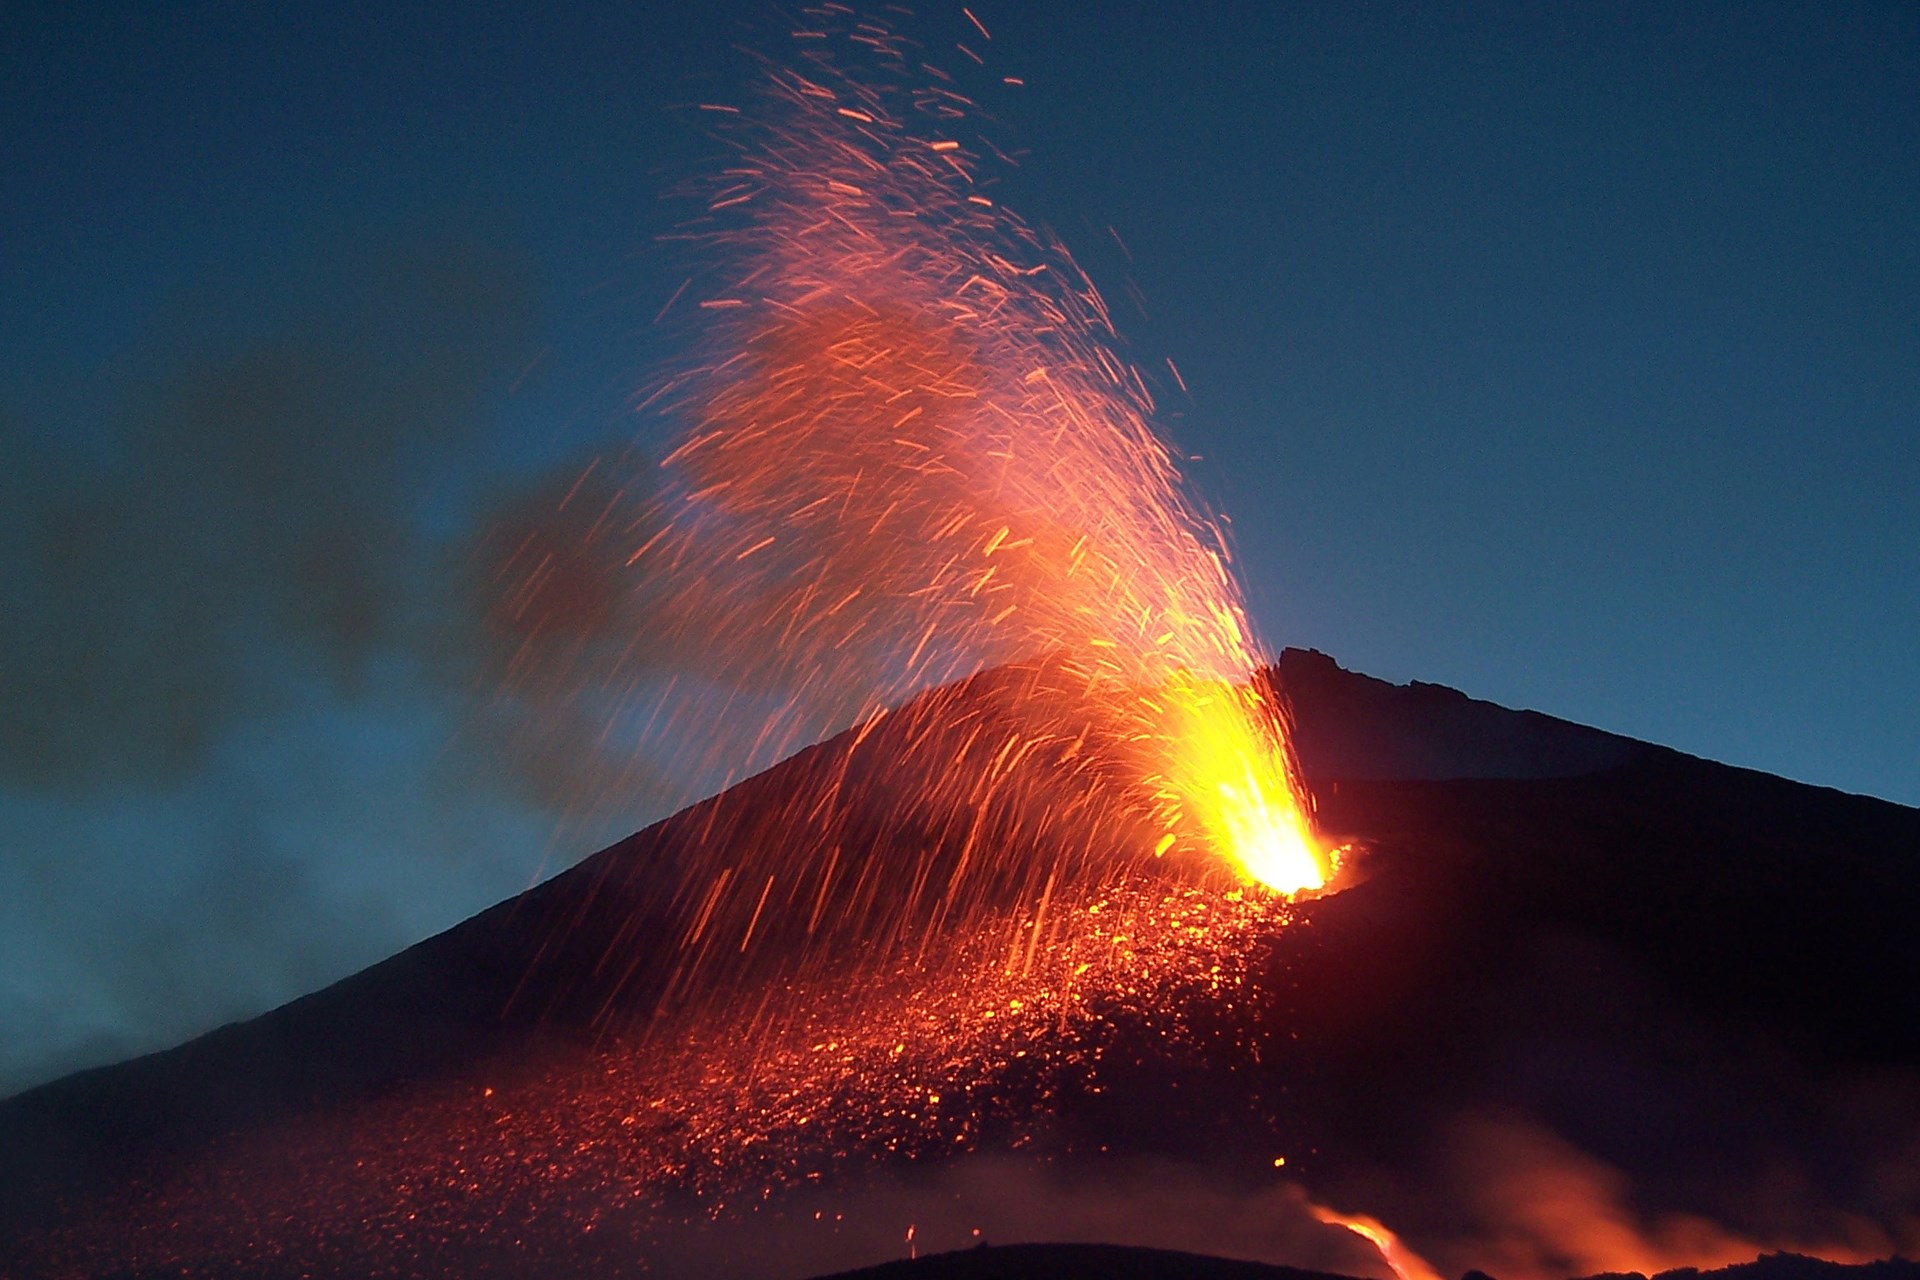 is mount etna a tourist attraction